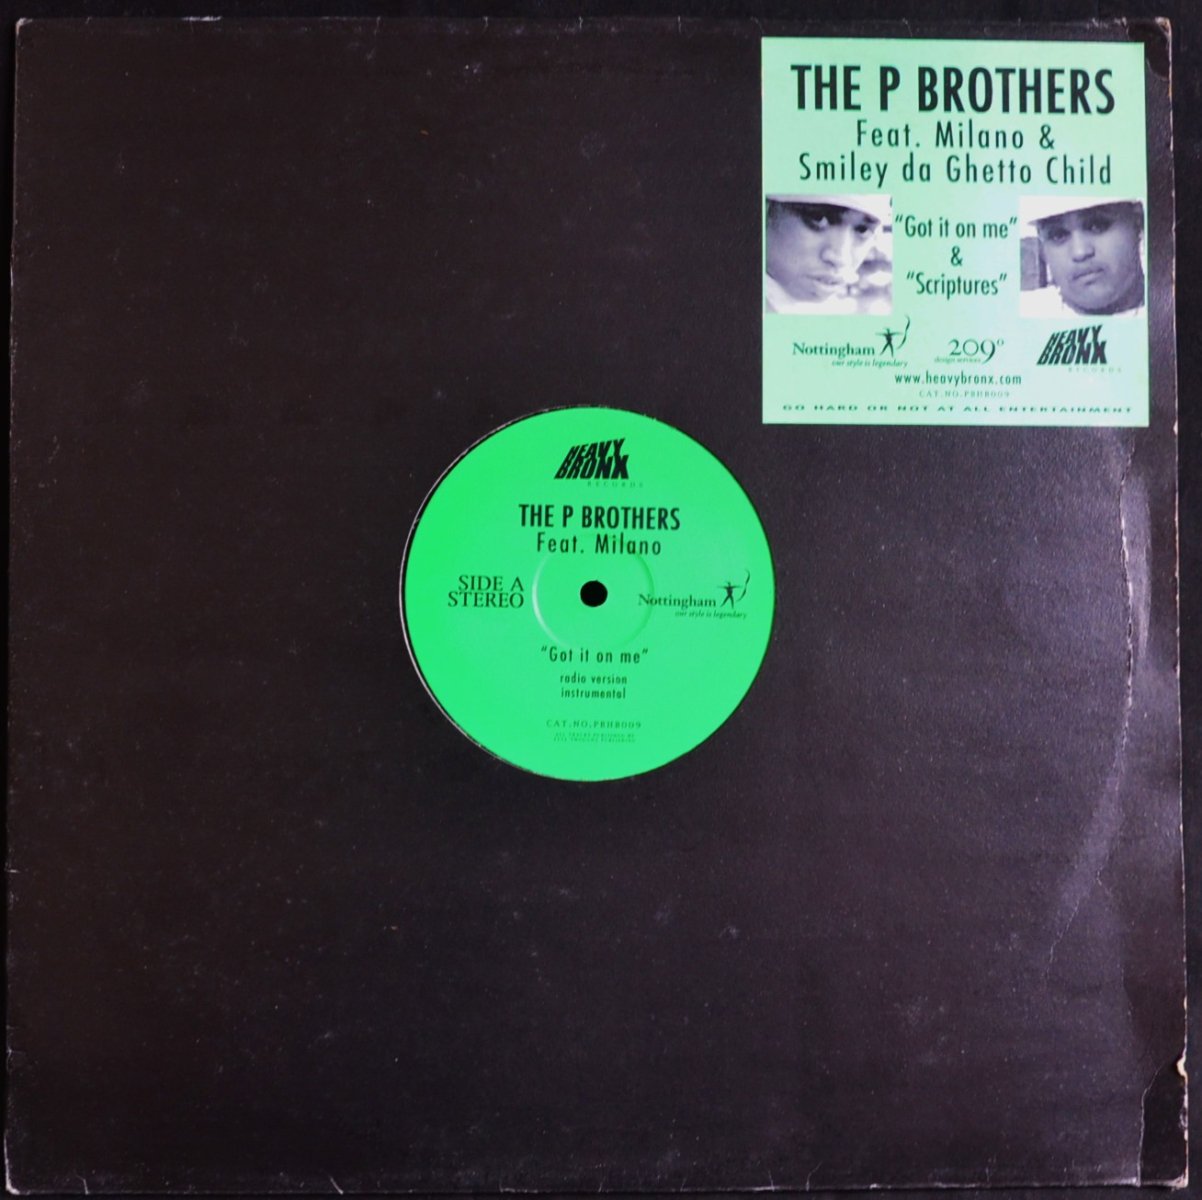 THE P BROTHERS FEAT. MILANO & SMILEY DA GHETTO CHILD / GOT IT ON ME / SCRIPTURES (12